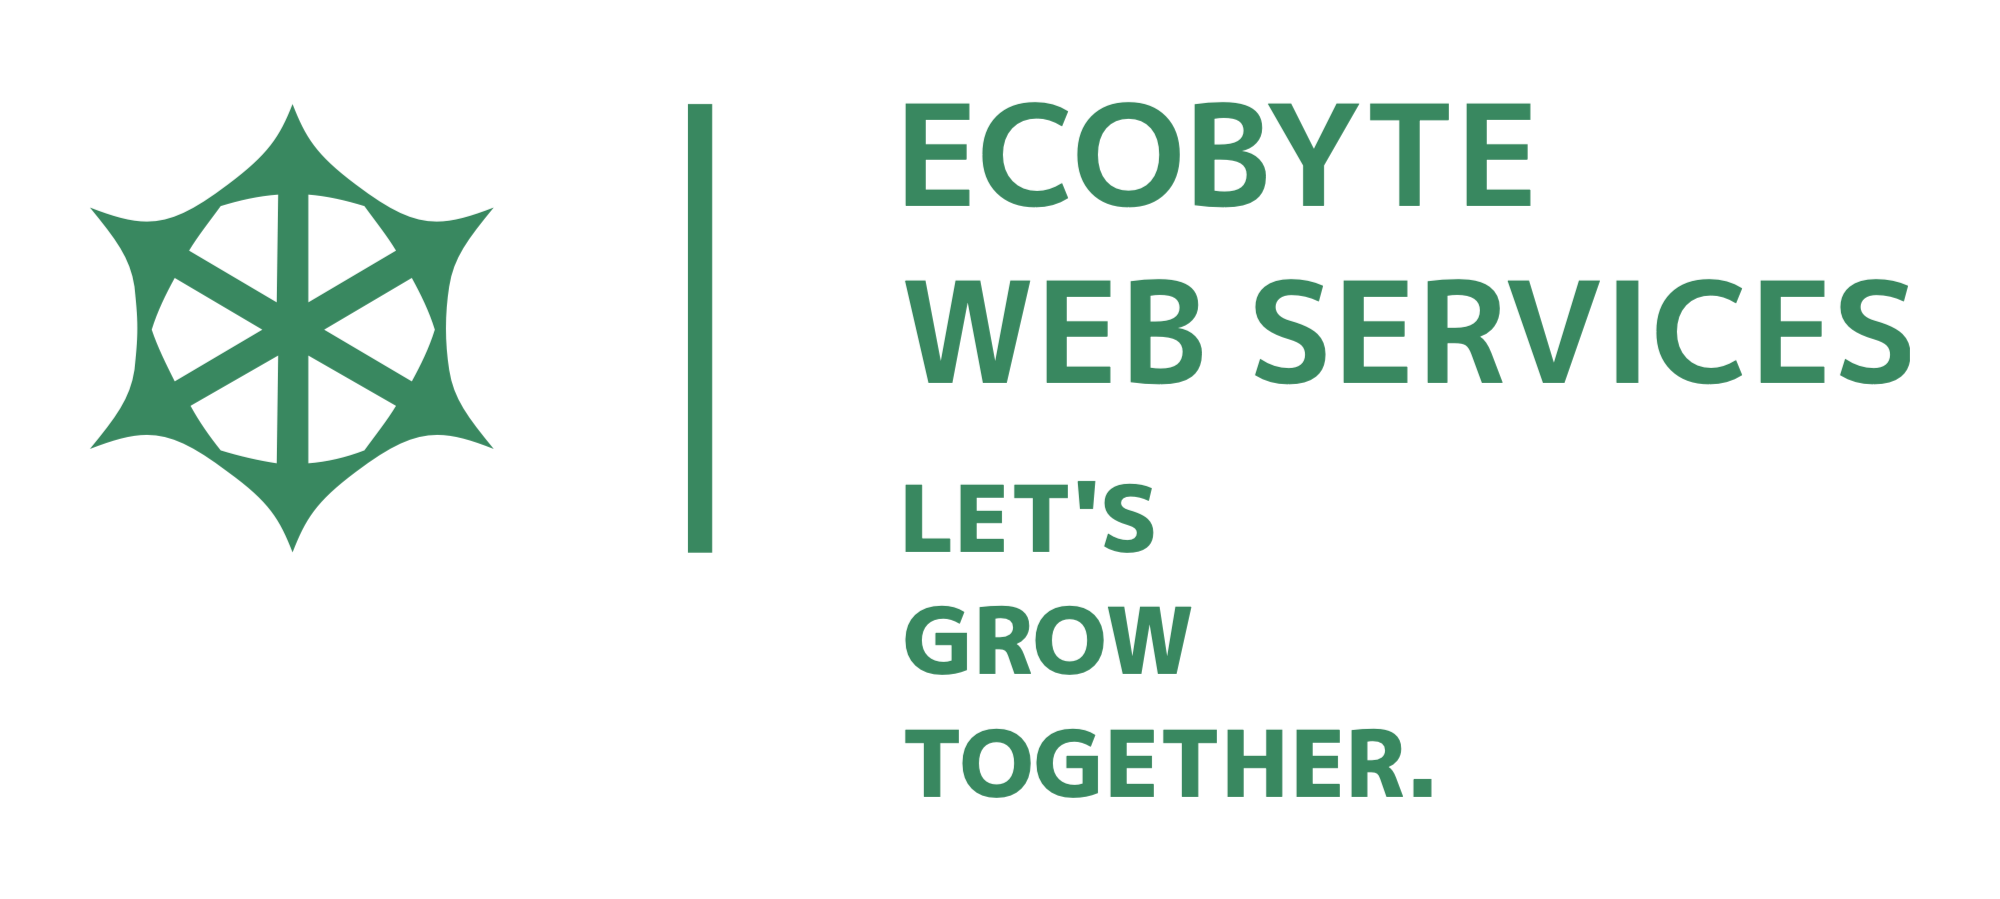 Ecobyte Web Services, official logo with slogan "Let's grow together".